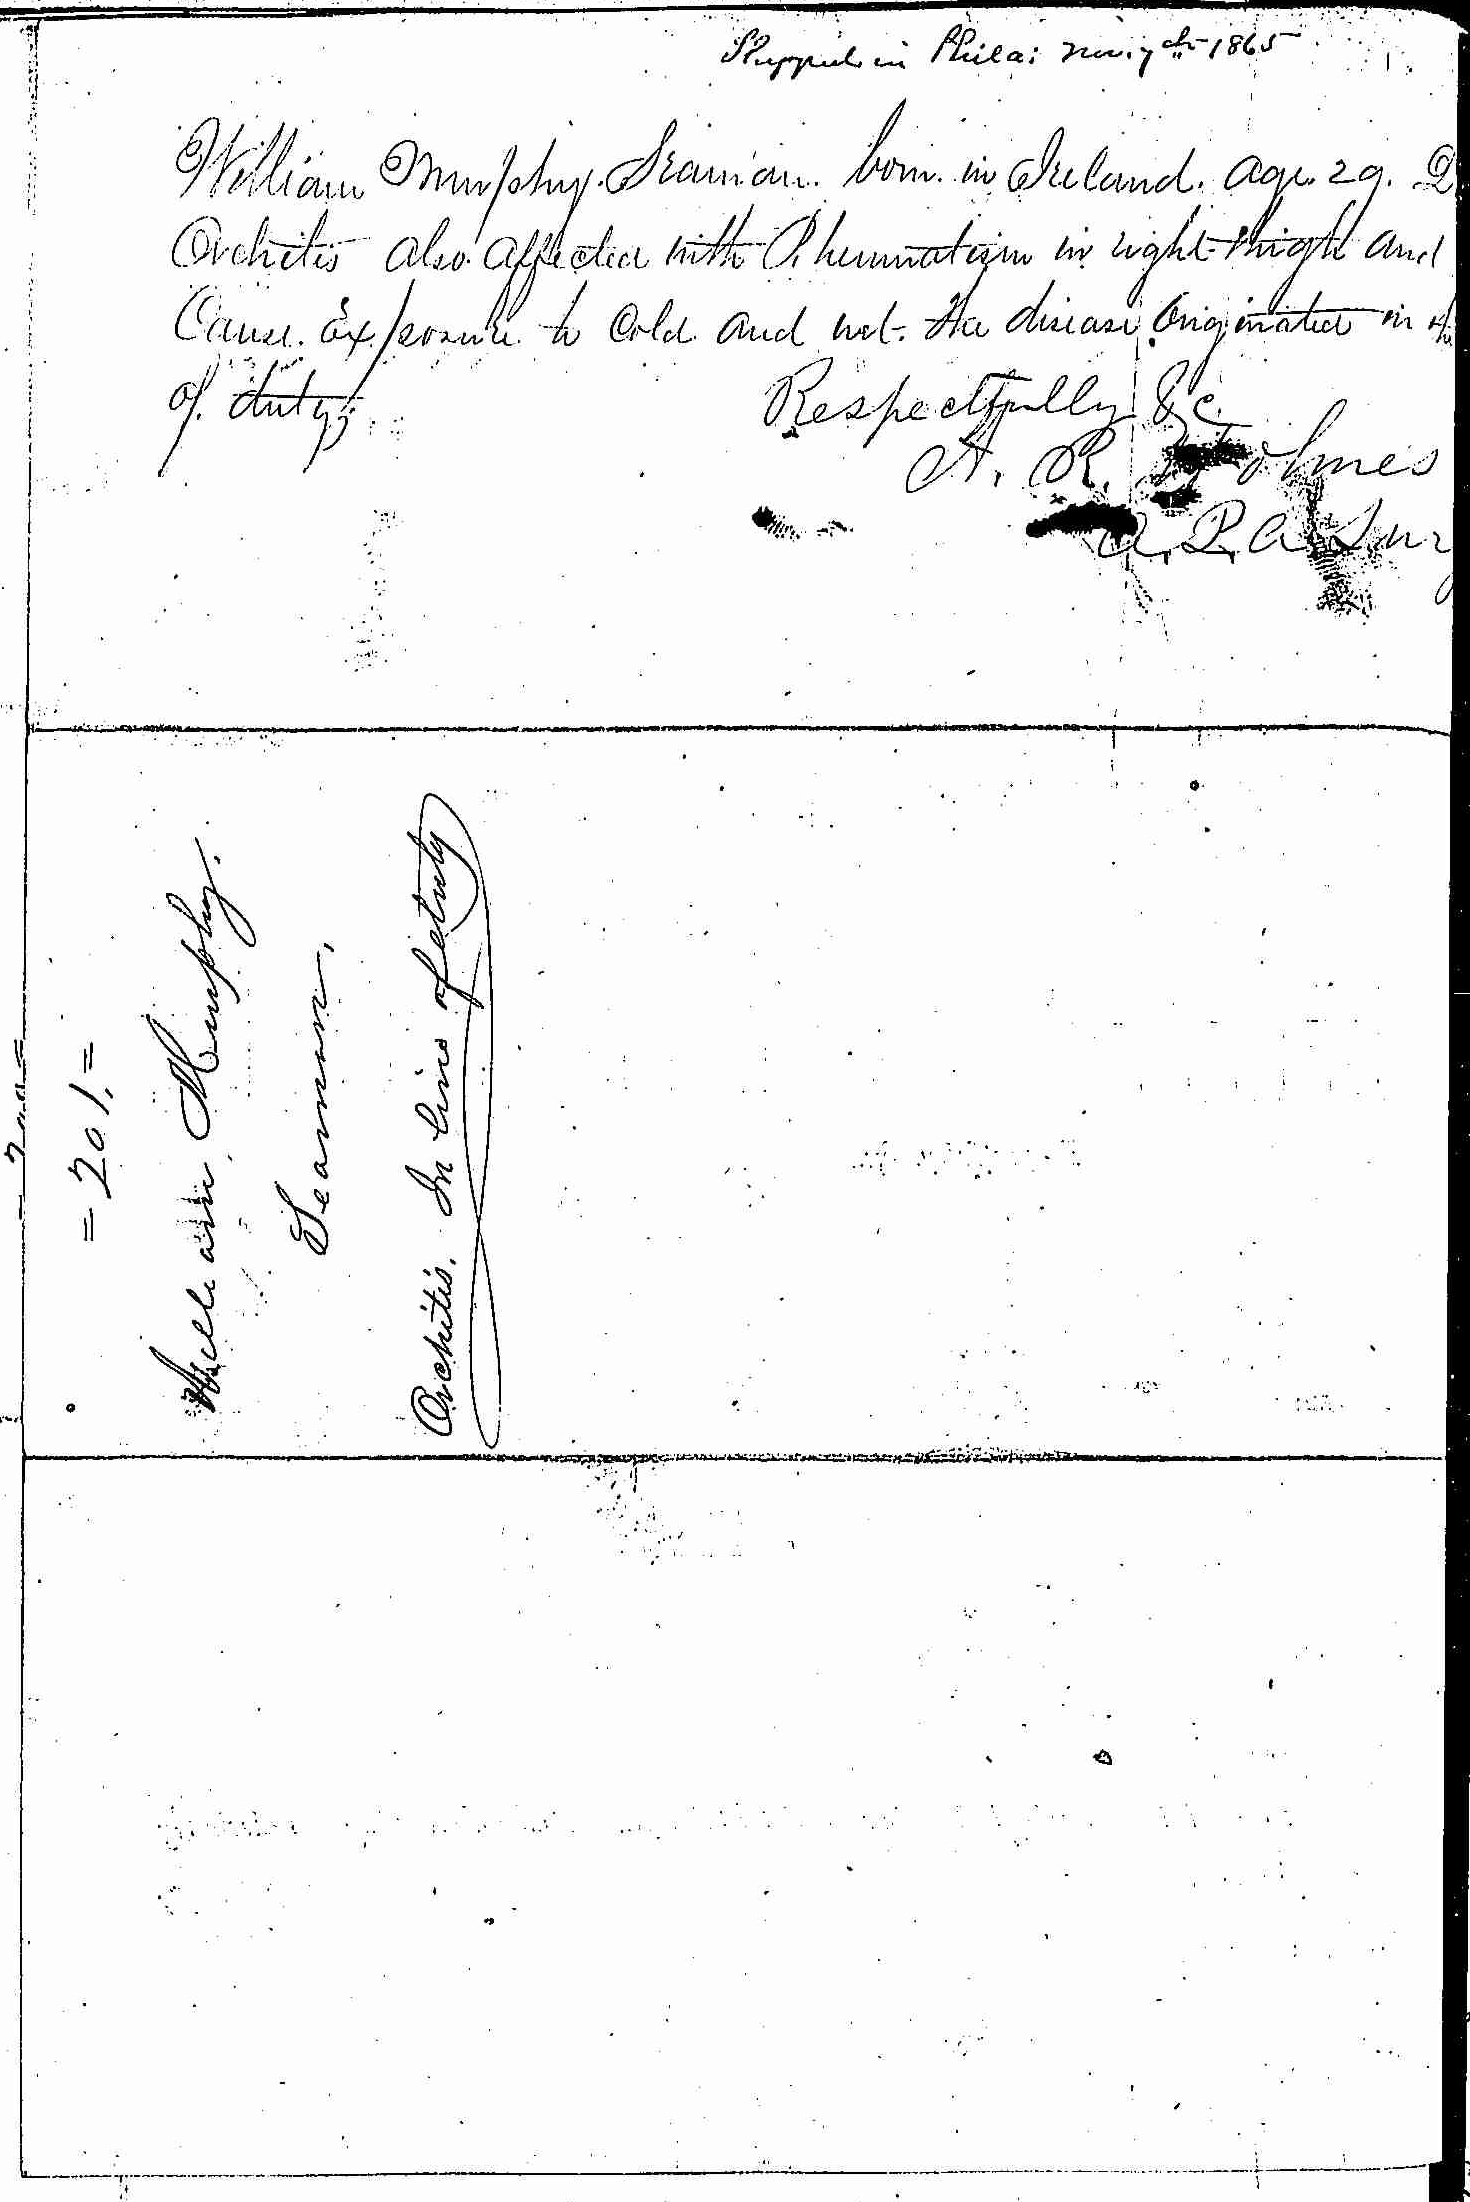 Entry for William Murphy (page 2 of 2) in the log Hospital Tickets and Case Papers - Naval Hospital - Washington, D.C. - 1866-68